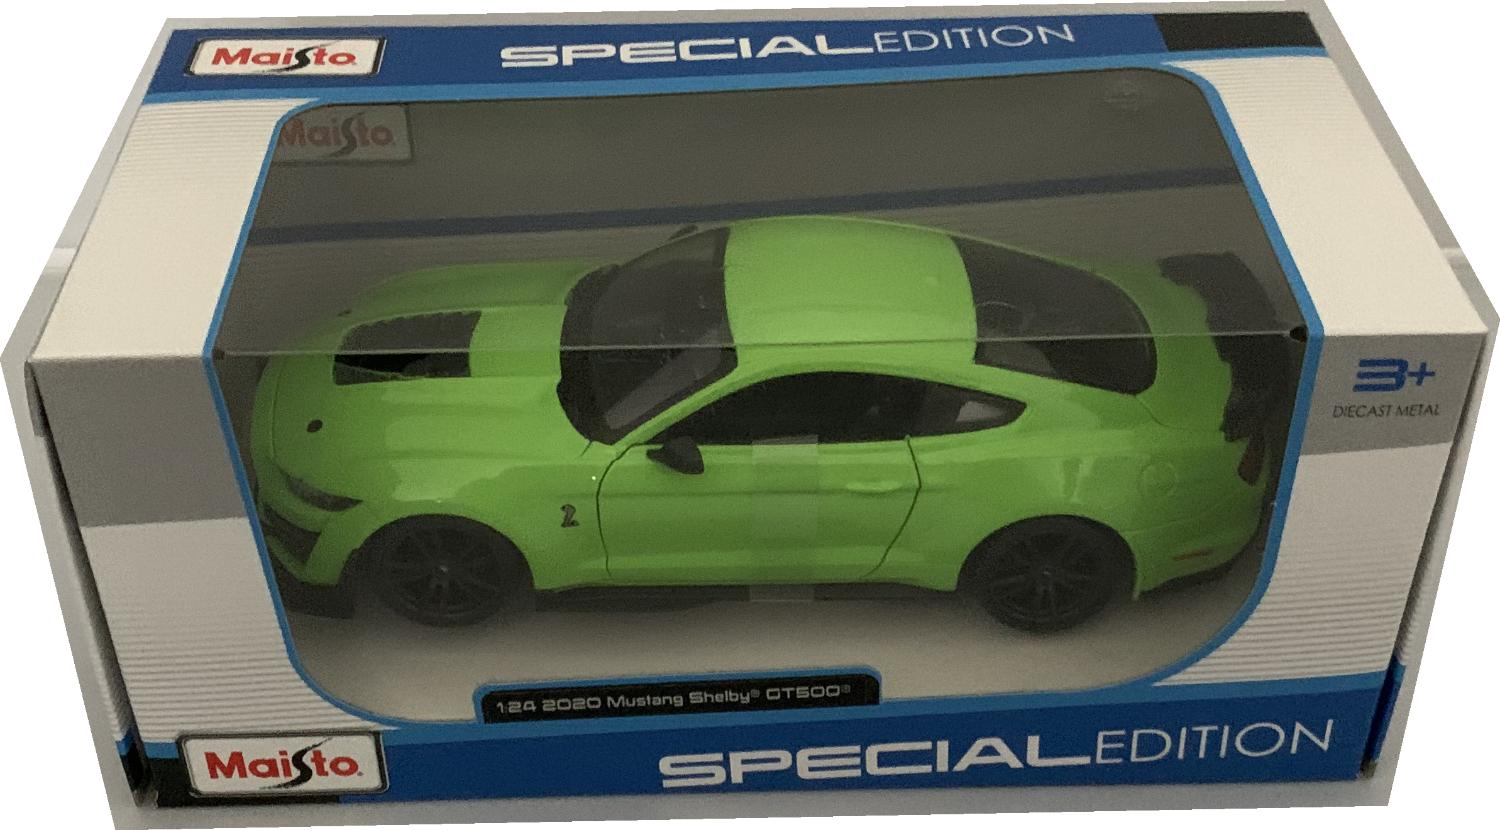 A good reproduction of the Ford Mustang Shelby GT500 with detail throughout, all authentically recreated.  The model is presented in a window display box, the car is approx. 20 cm long and the presentation box is 23 cm long